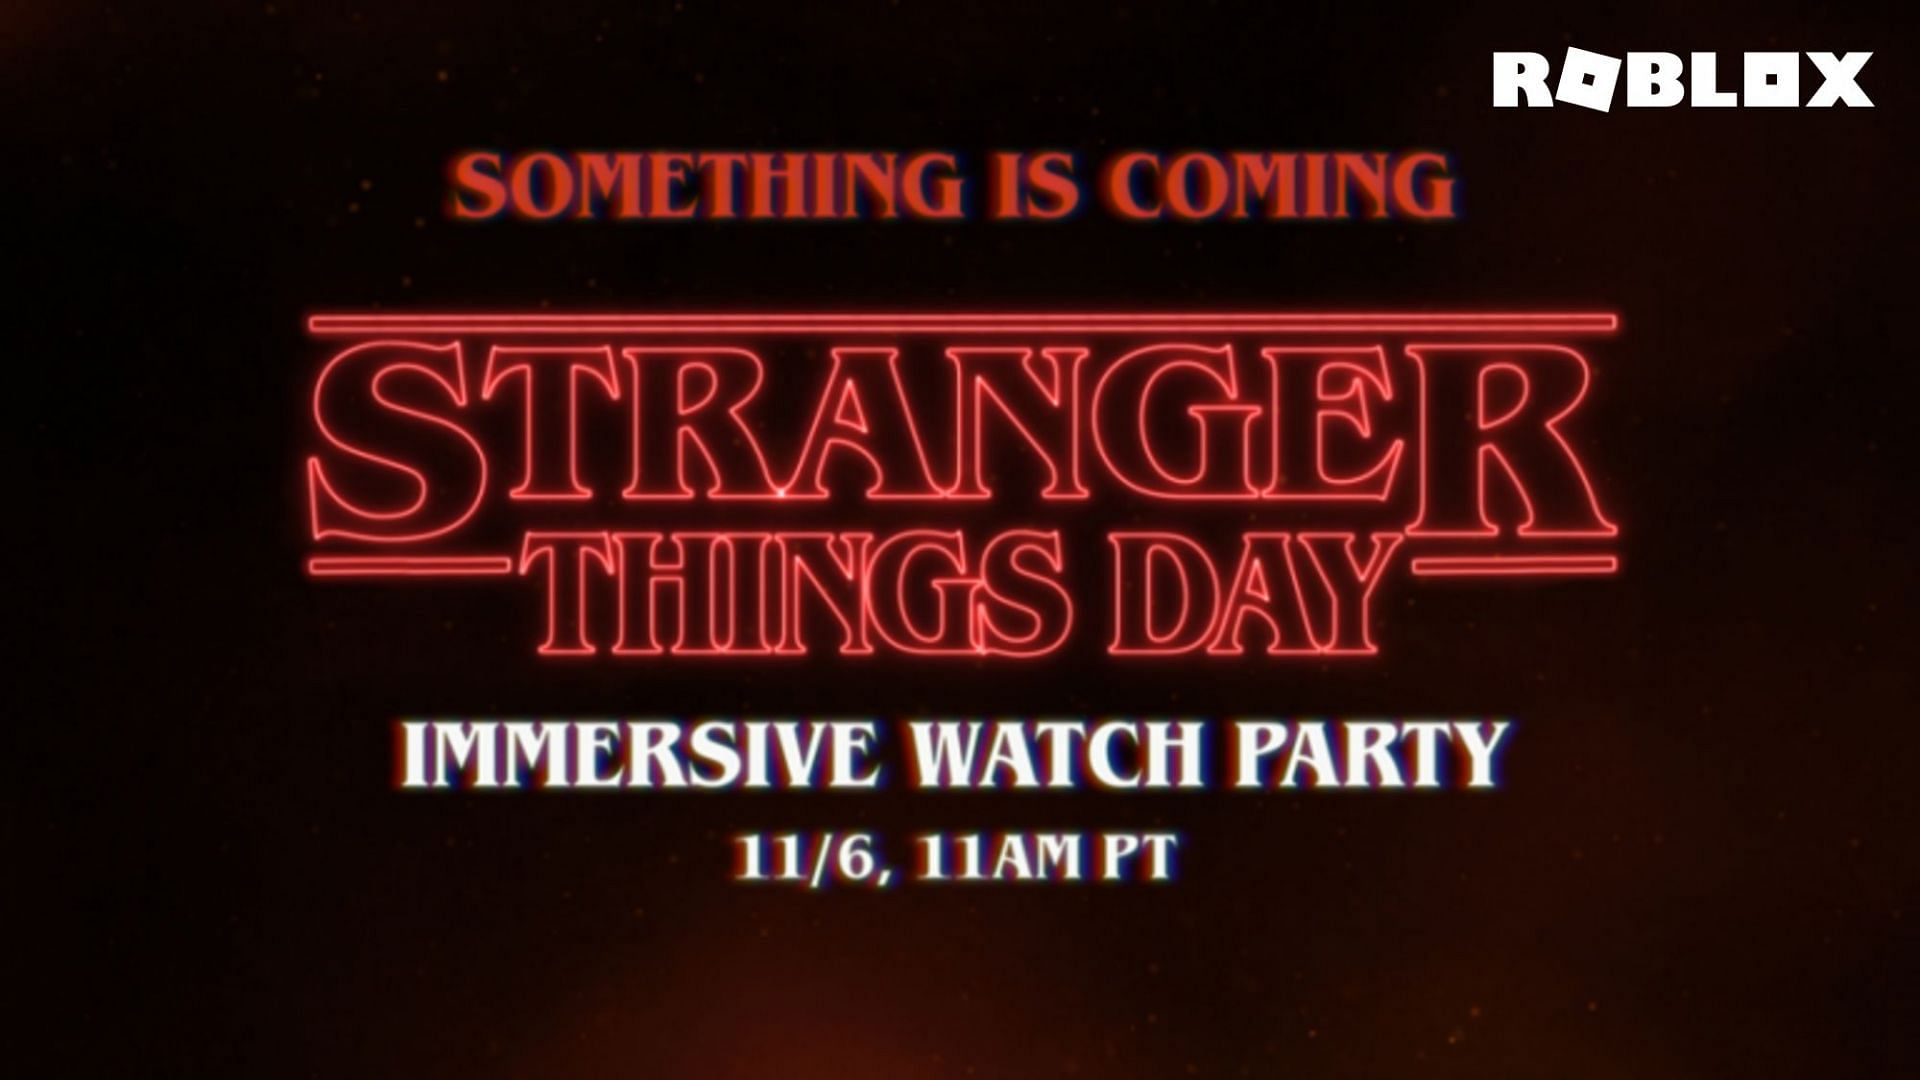 Enjoy the Stranger Things Watch Party in Roblox (Image via Roblox)